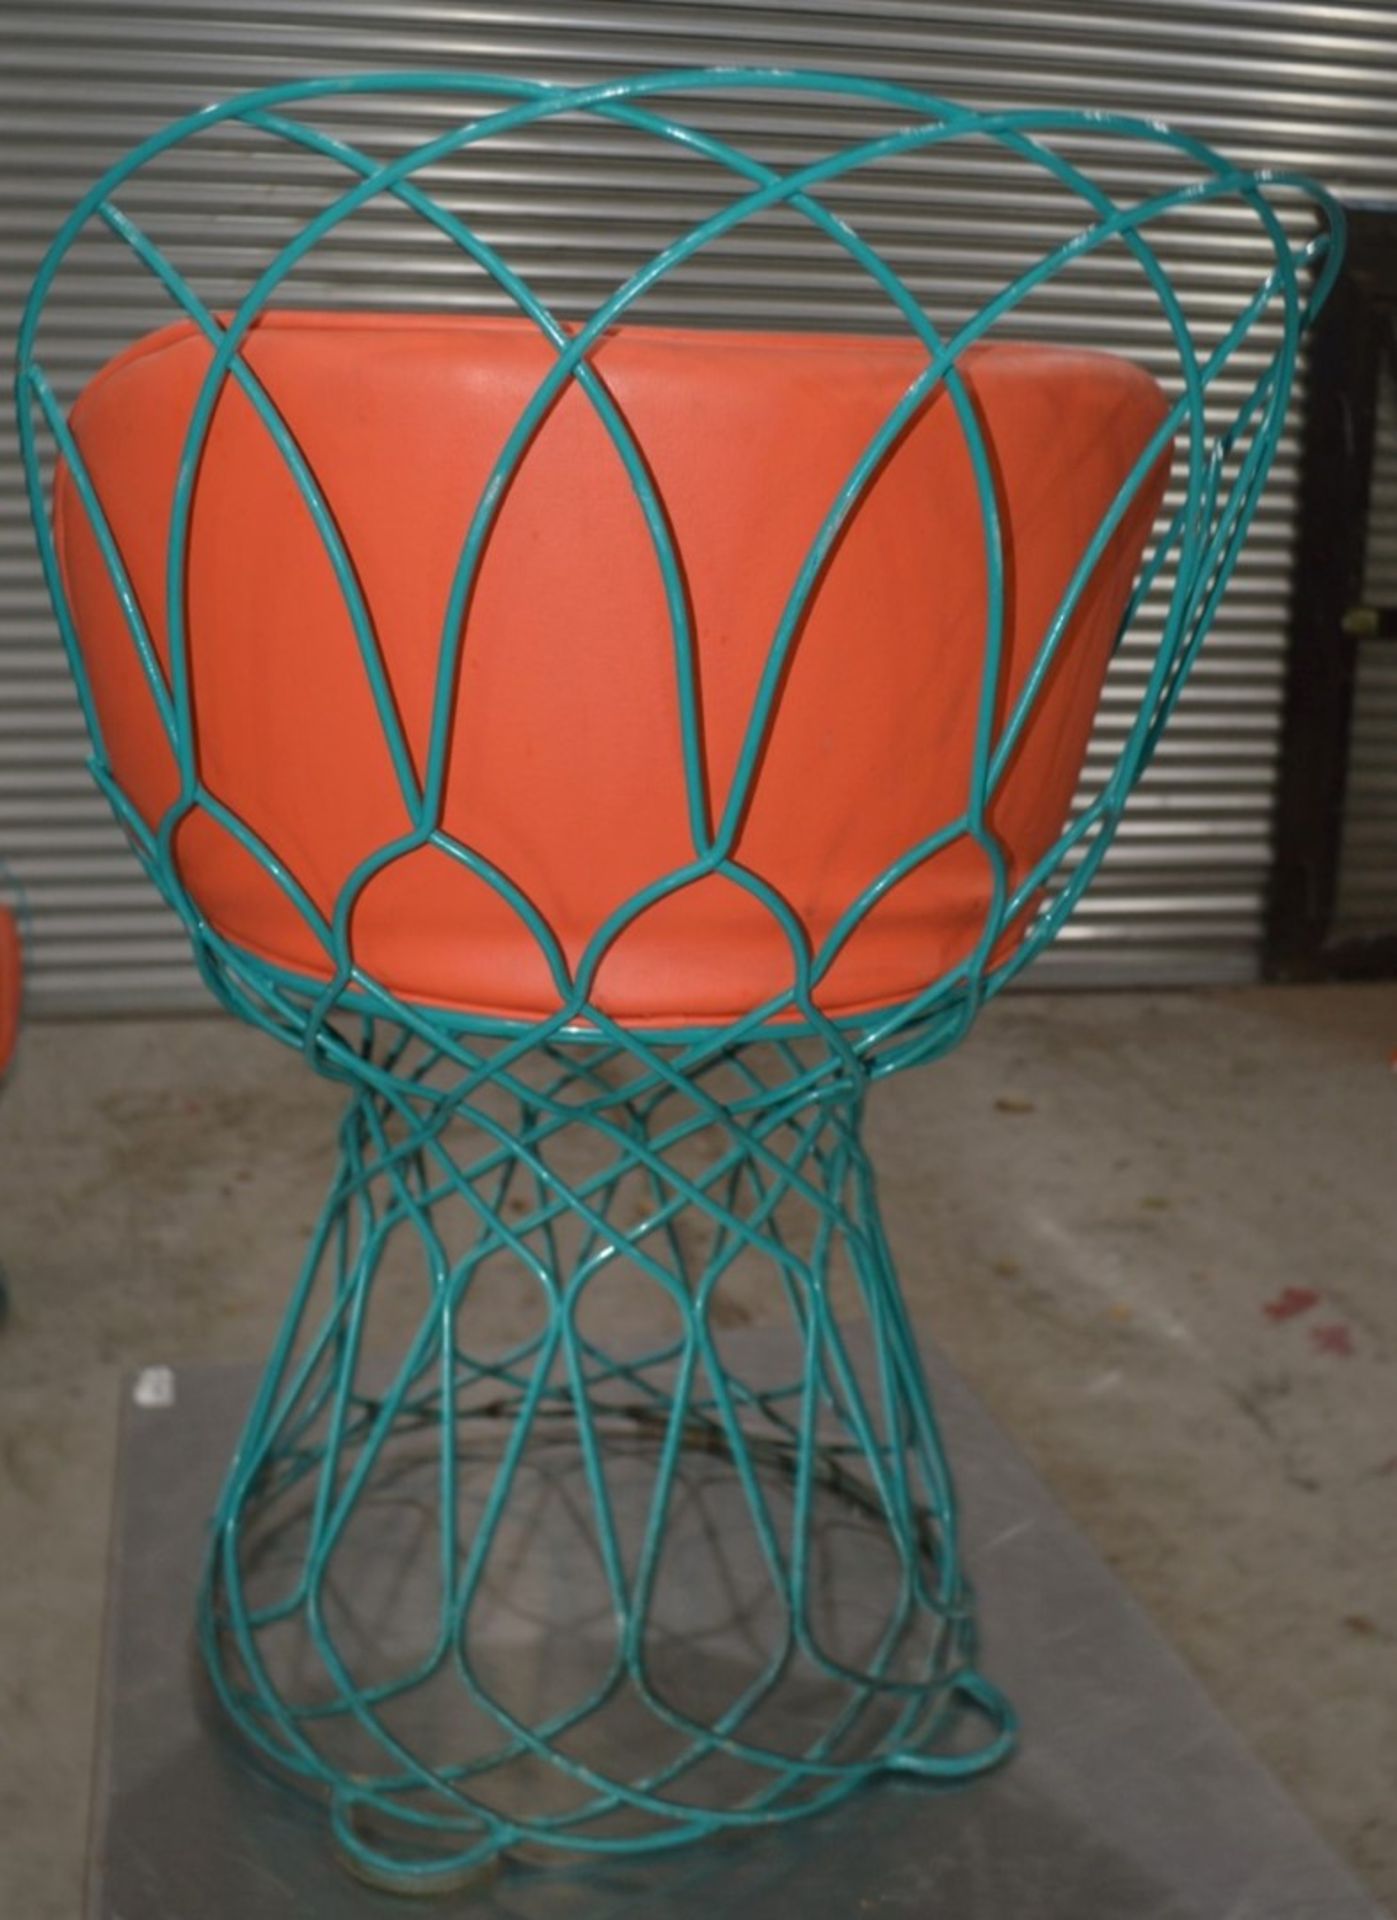 2 x Commercial Outdoor Wire Bistro Chairs With Padded Seats In Orange - Dimensions: H80 x W62 x D45c - Image 4 of 6